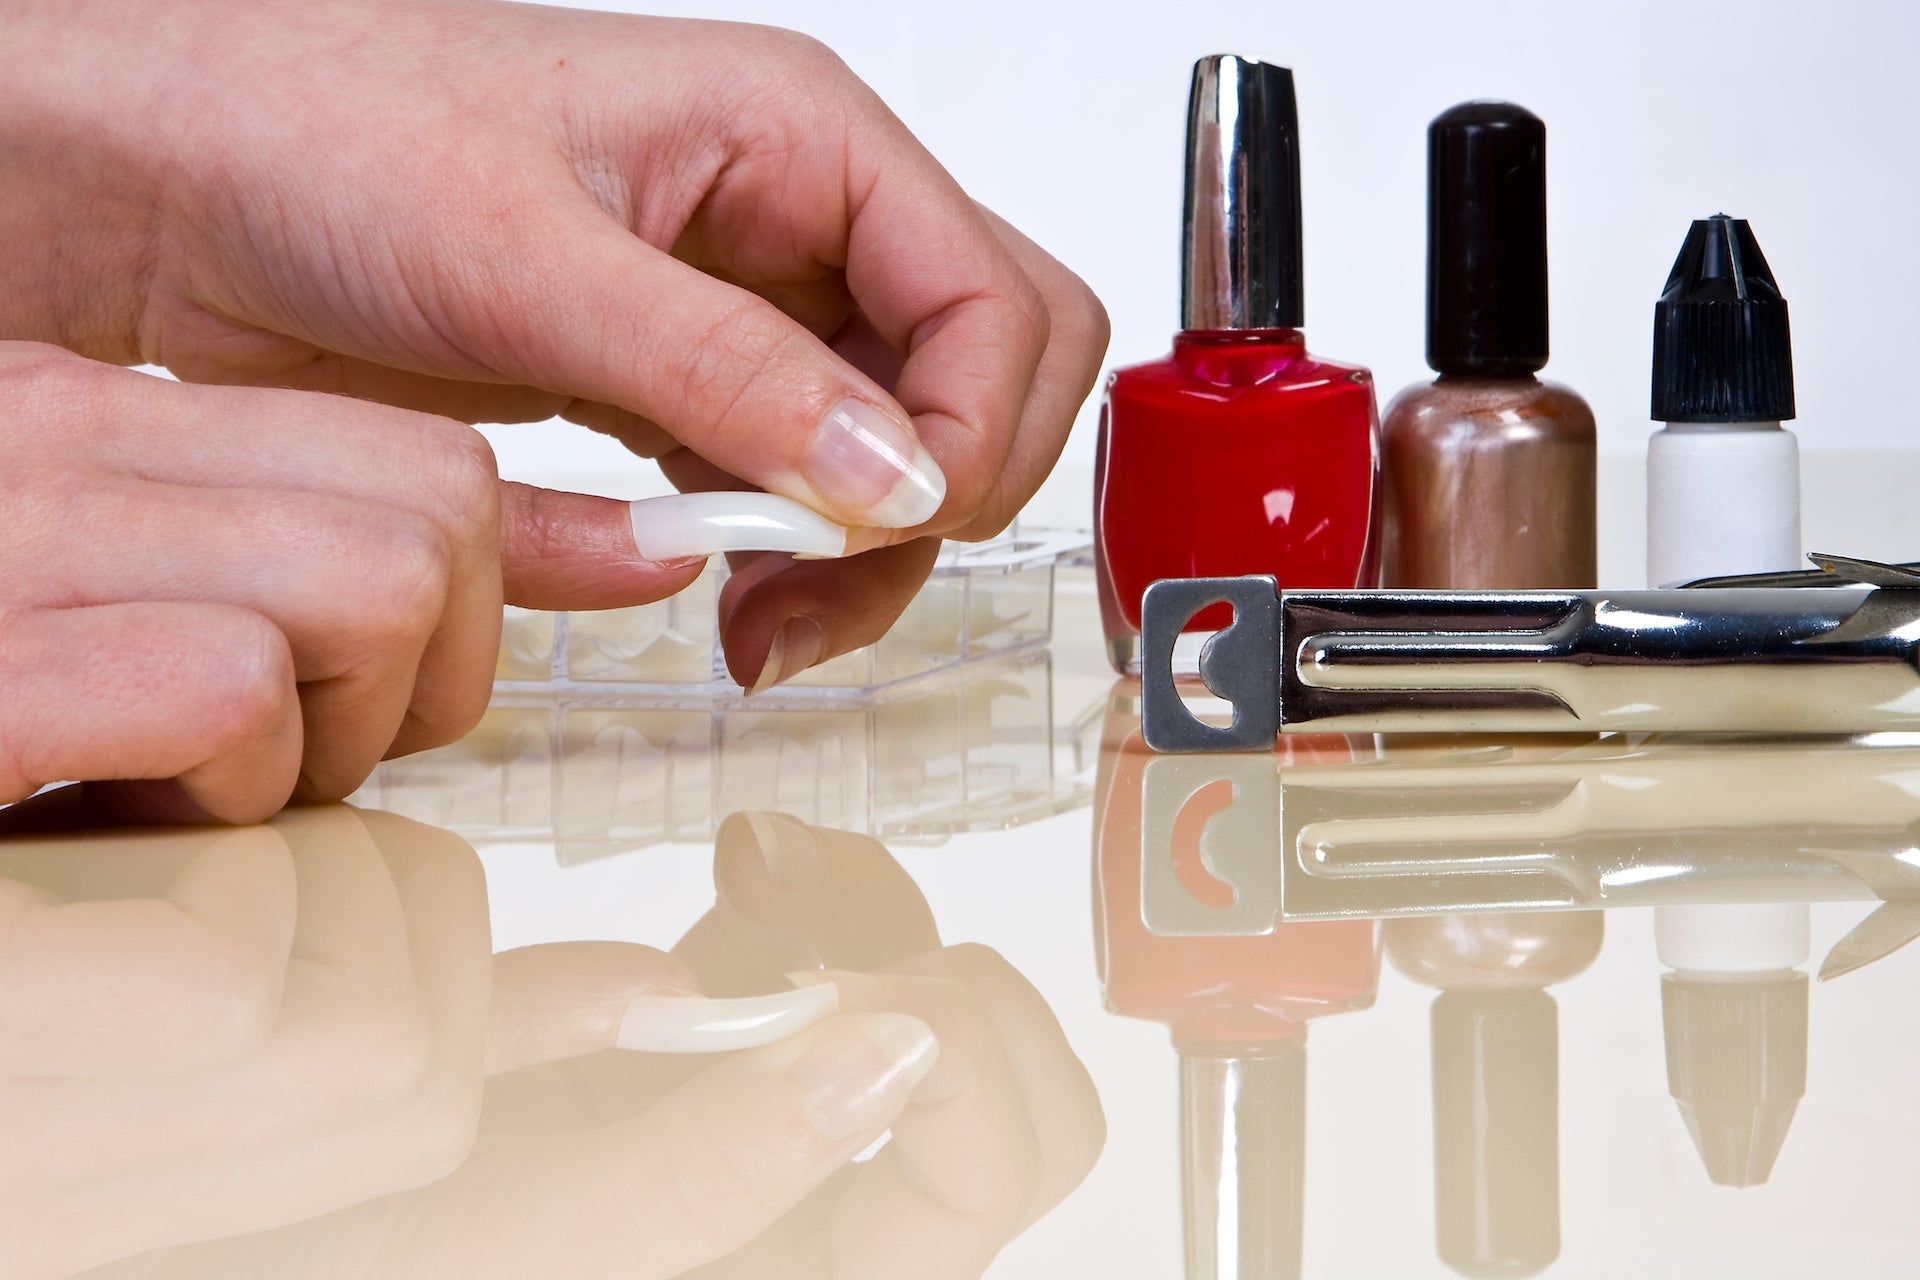 01. Pose d'ongles vernis gel - Premium  chez Ongles & Design - Seulement $65! Shop now at Ongles & Design